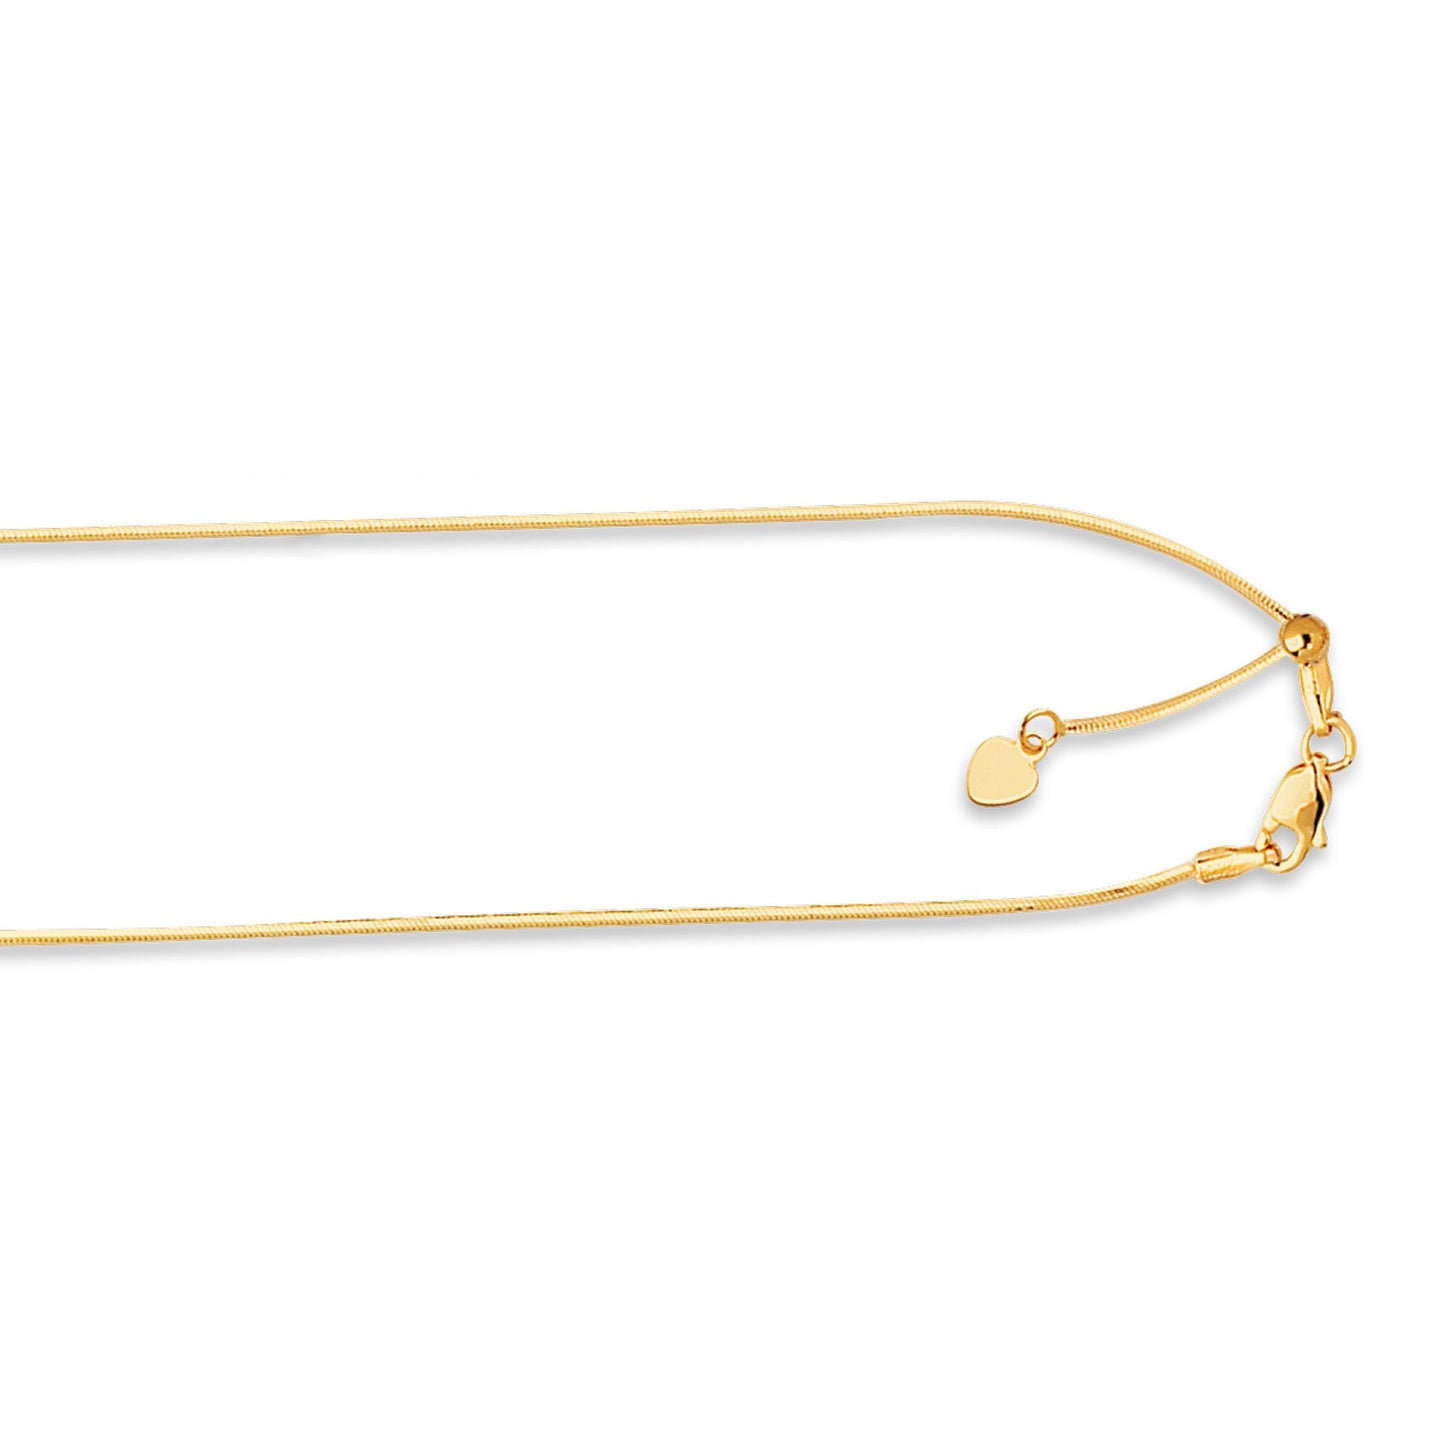 14K Gold Adjustable Octagonal Snake Chain Necklace with Lobster Lock